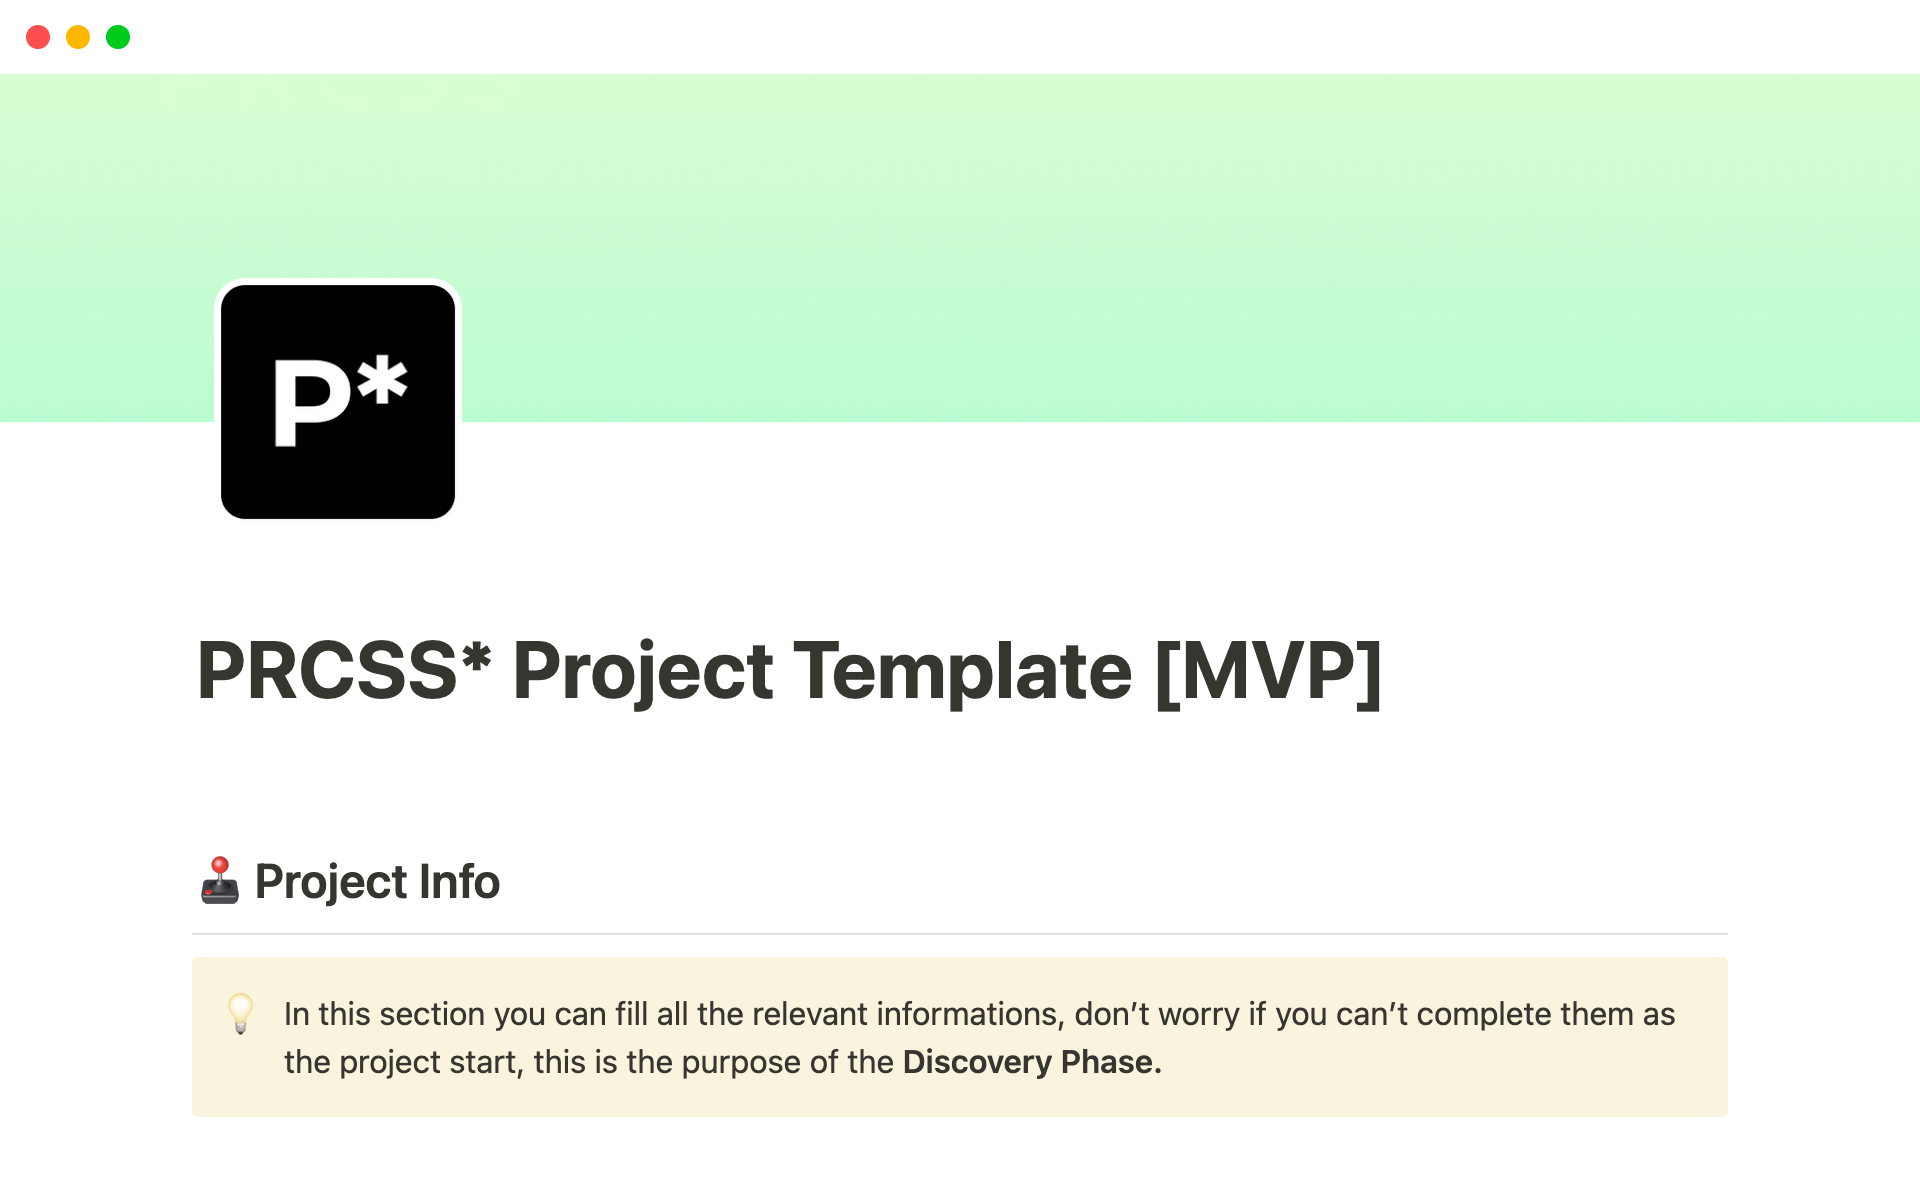 PRCSS project template